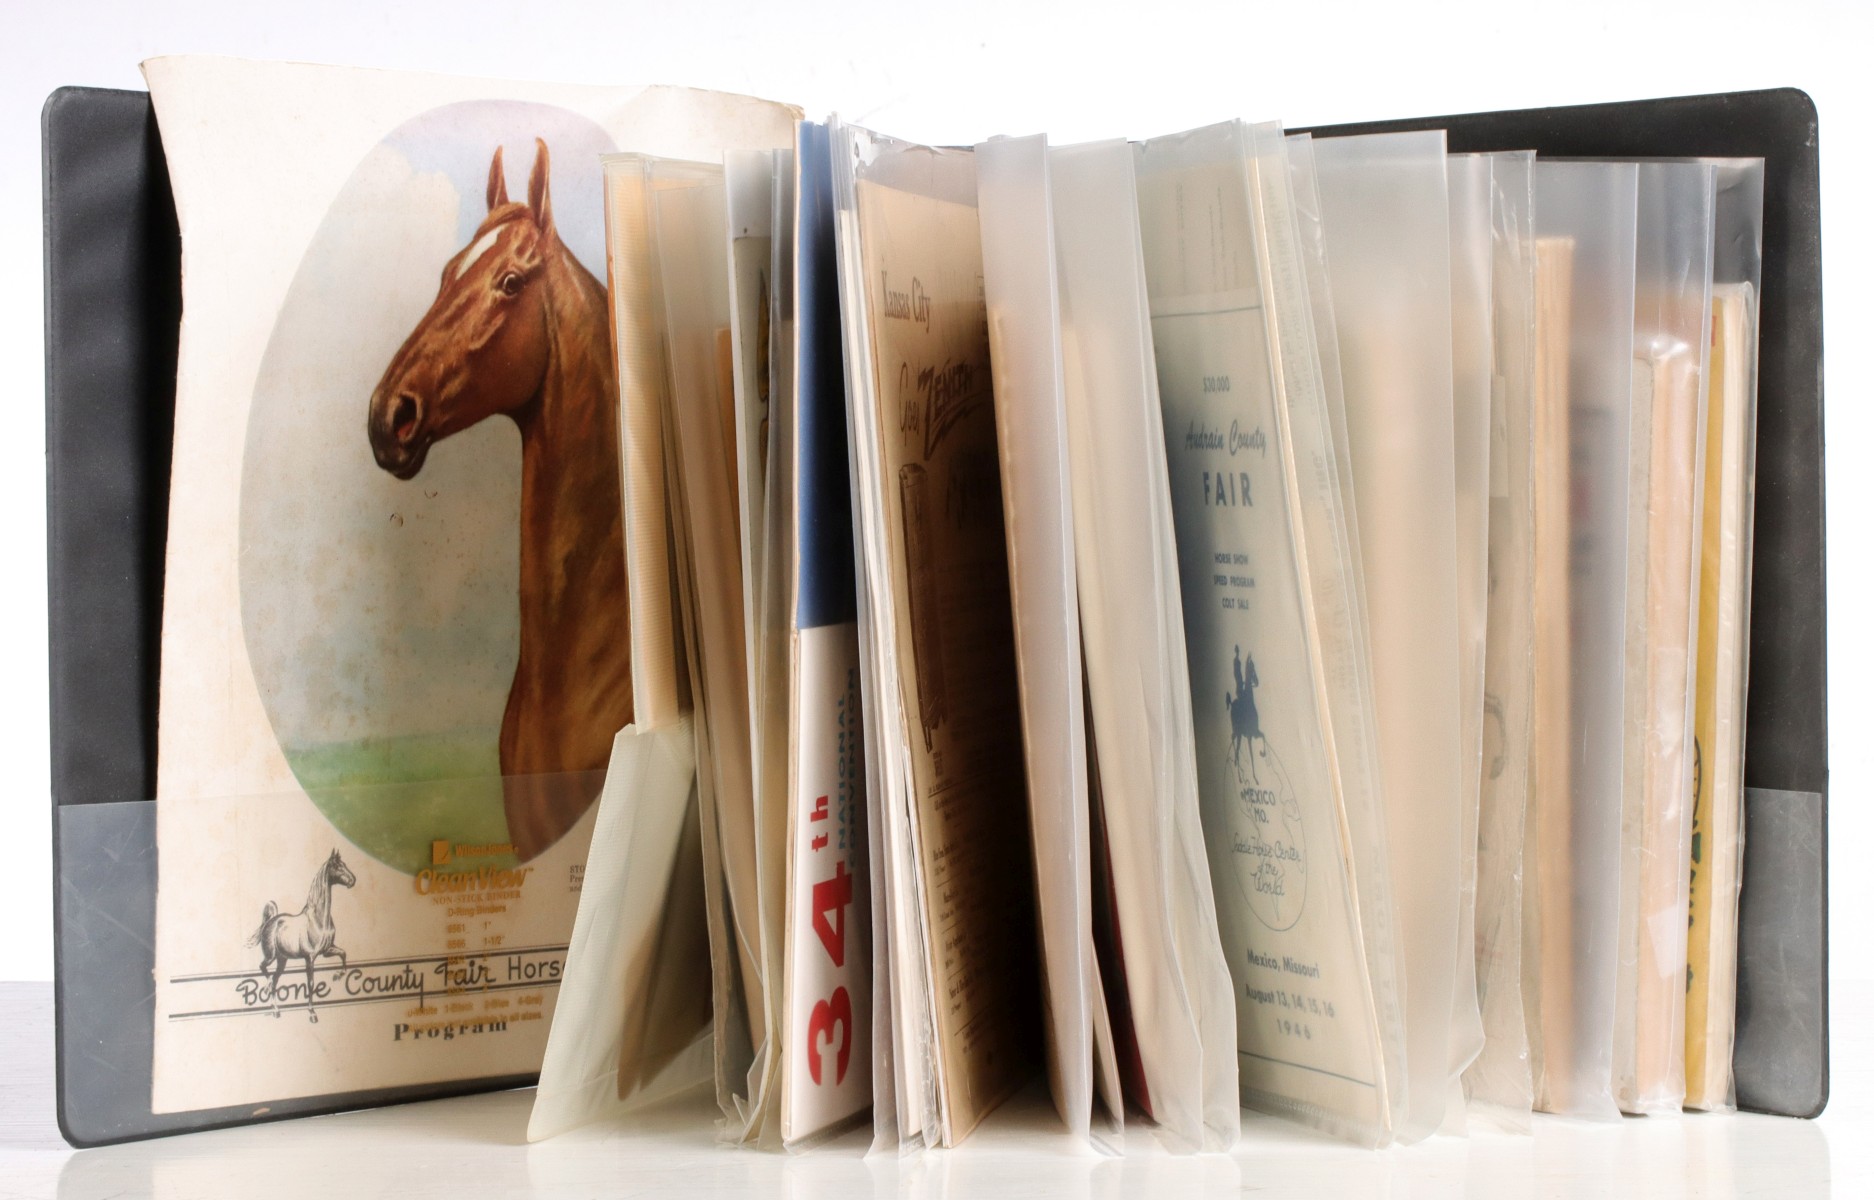 A LARGE COLLECTION OF EARLY 20C. HORSE SHOW PROGRAMS